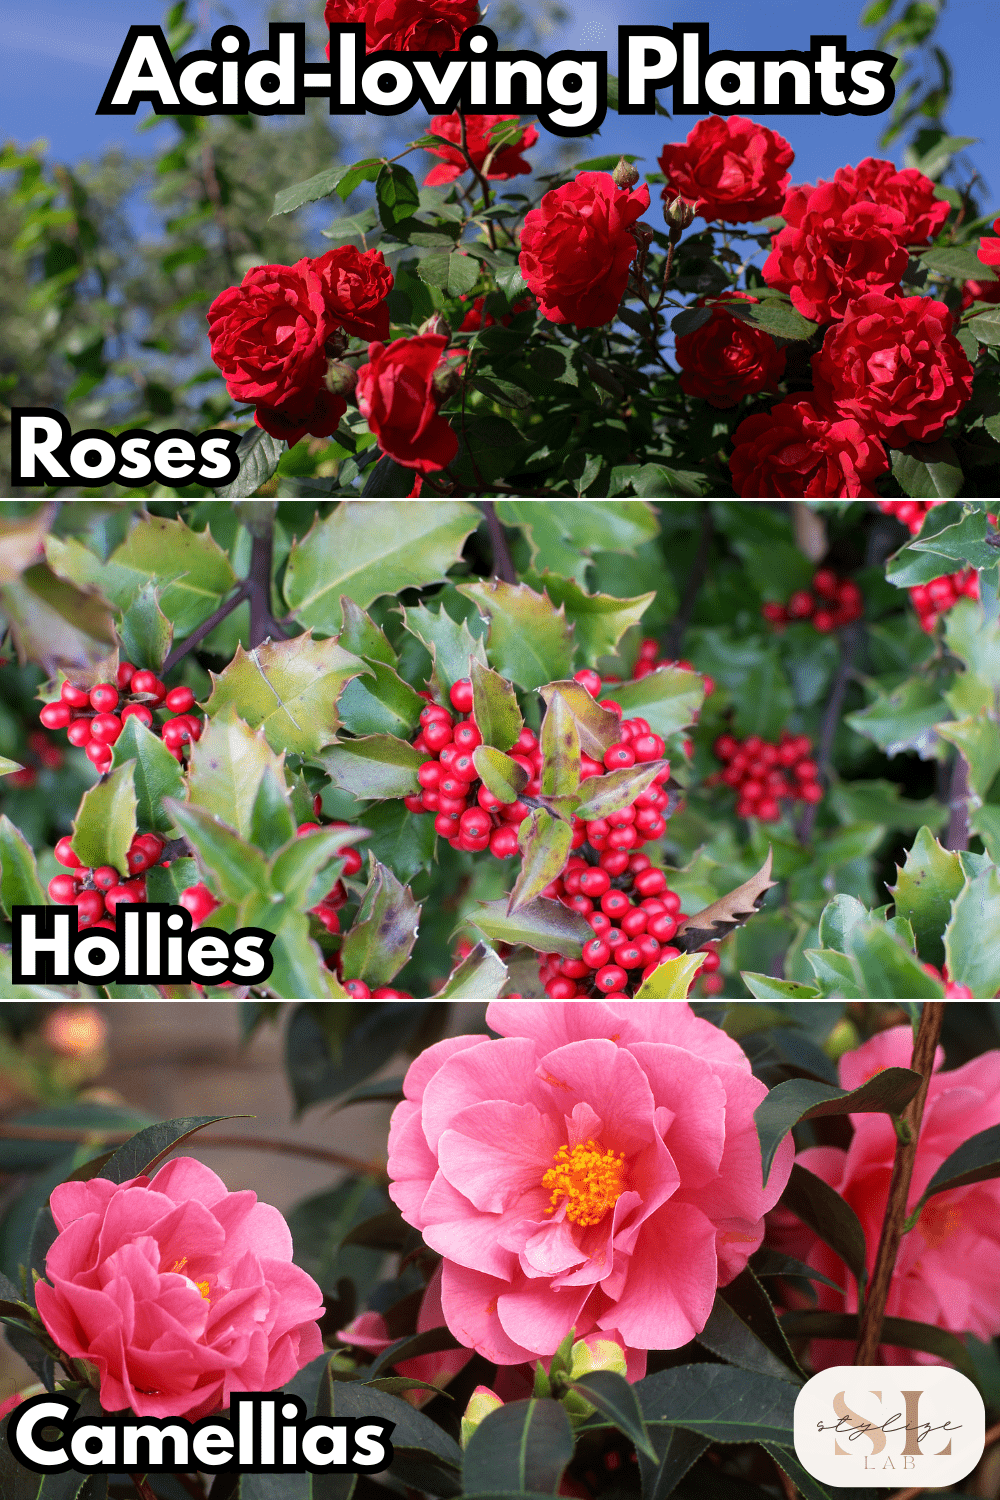 Acid-Loving Plants rosed, hollies and camellias , good to use coffee grounds